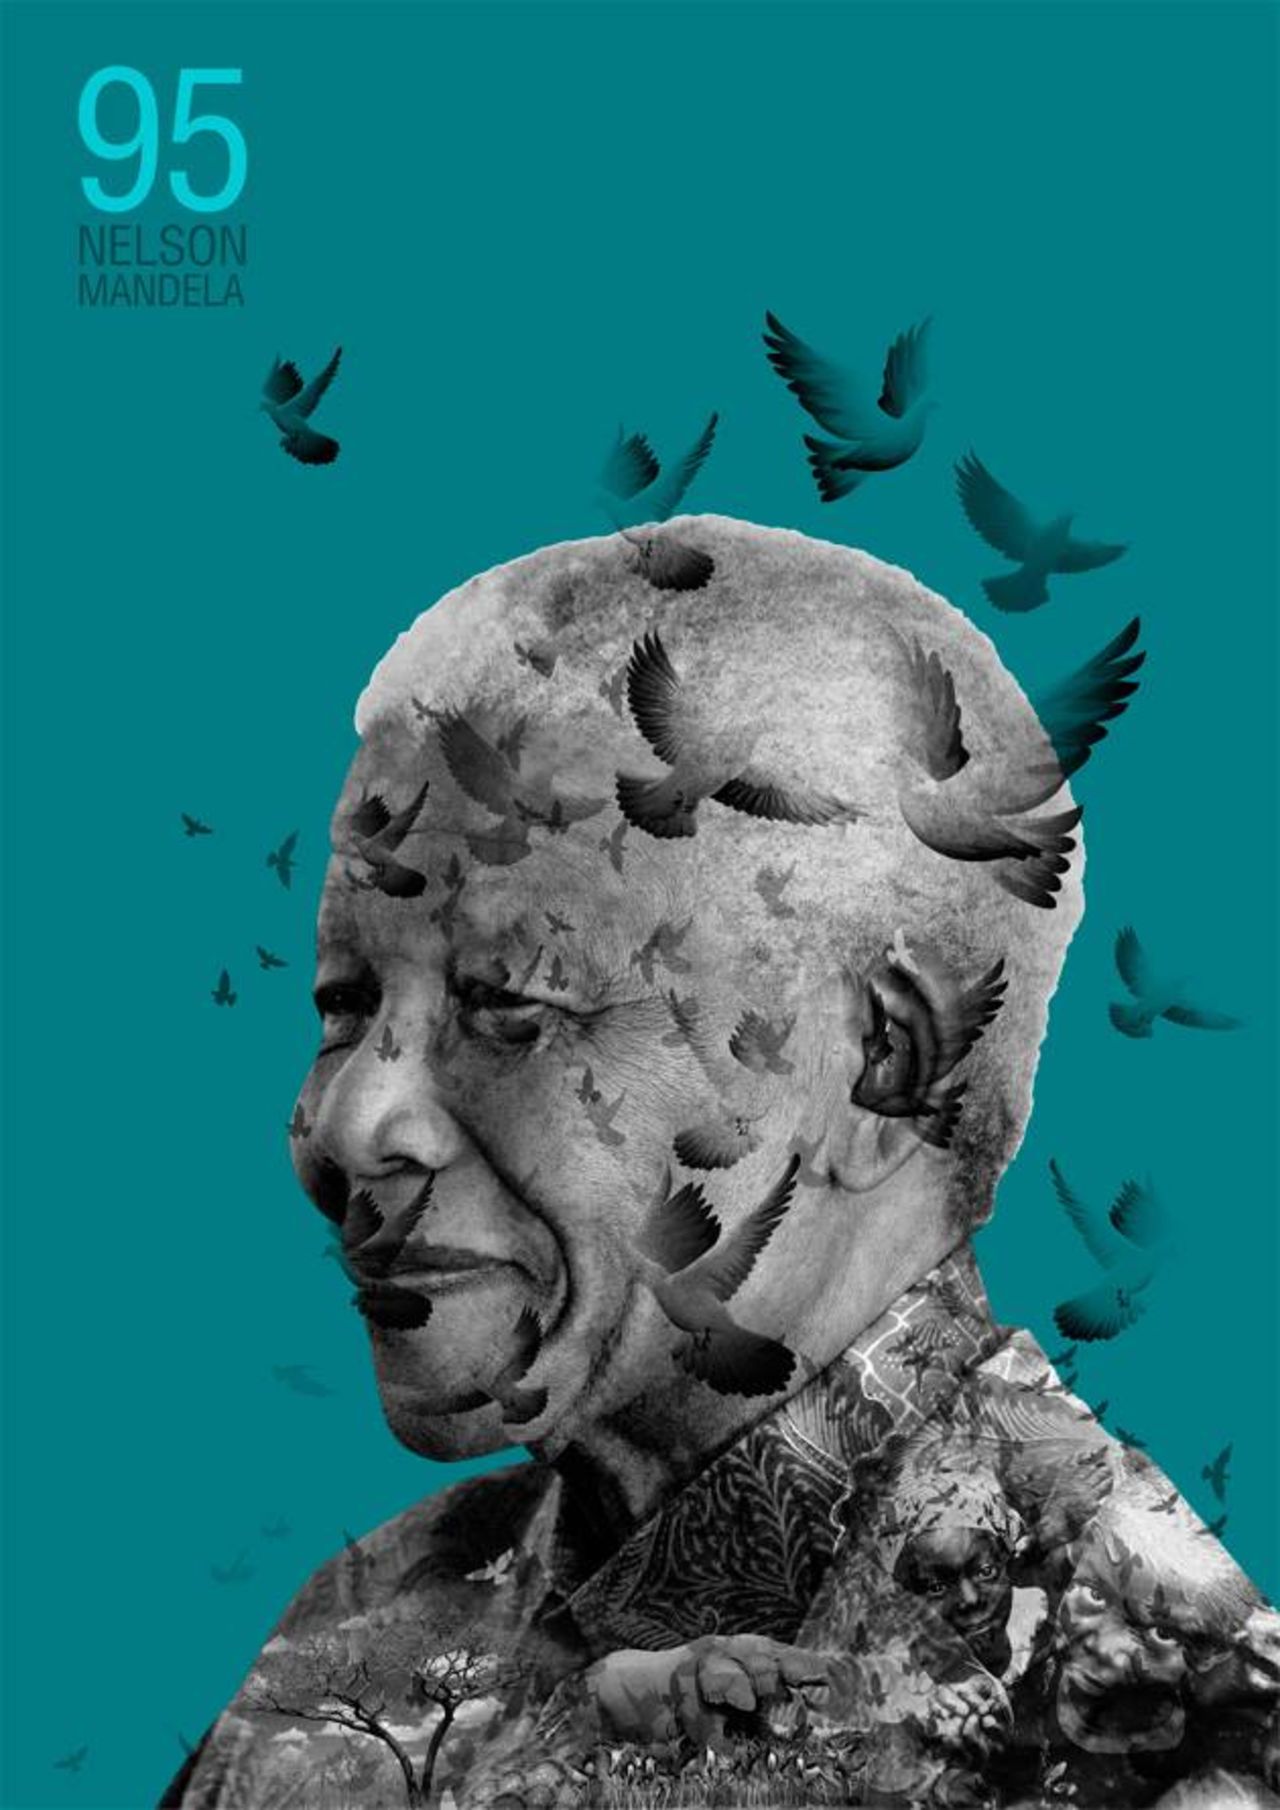 The Mandela Poster Project is exhibiting images of Nelson Mandela from around the world. This poster is the work of Carlos Andrade, from Venezuela.